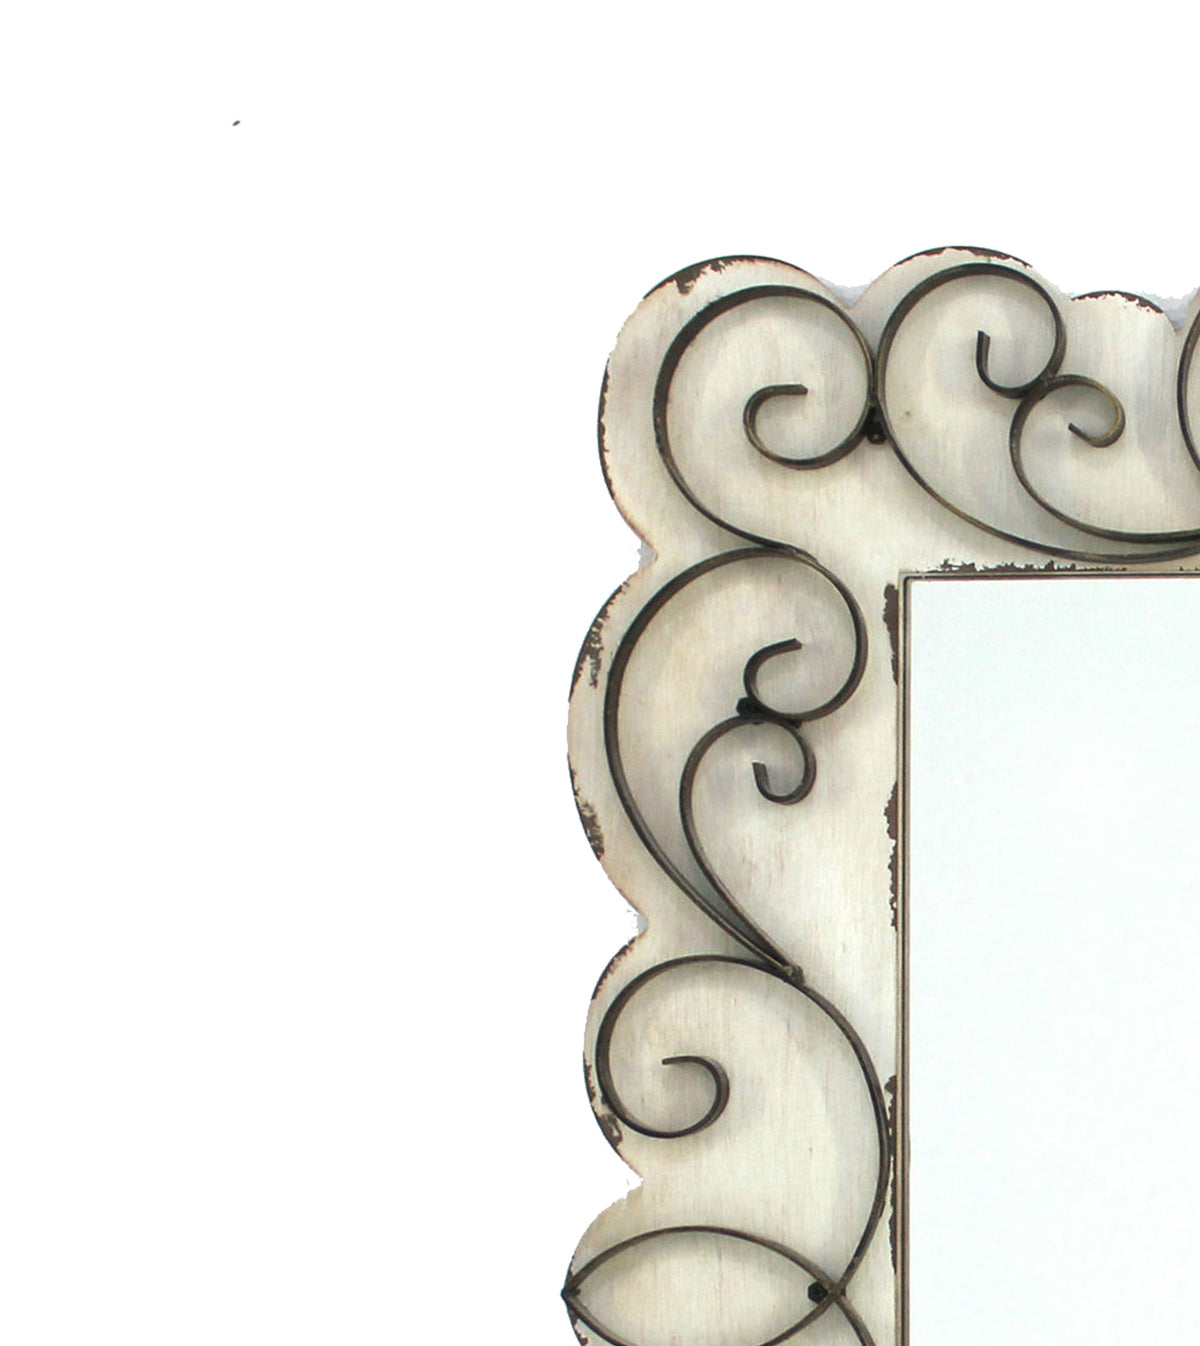 Rectangular Wall Mirror with Wooden Frame and Metal Scrolled edges, White - BM218345